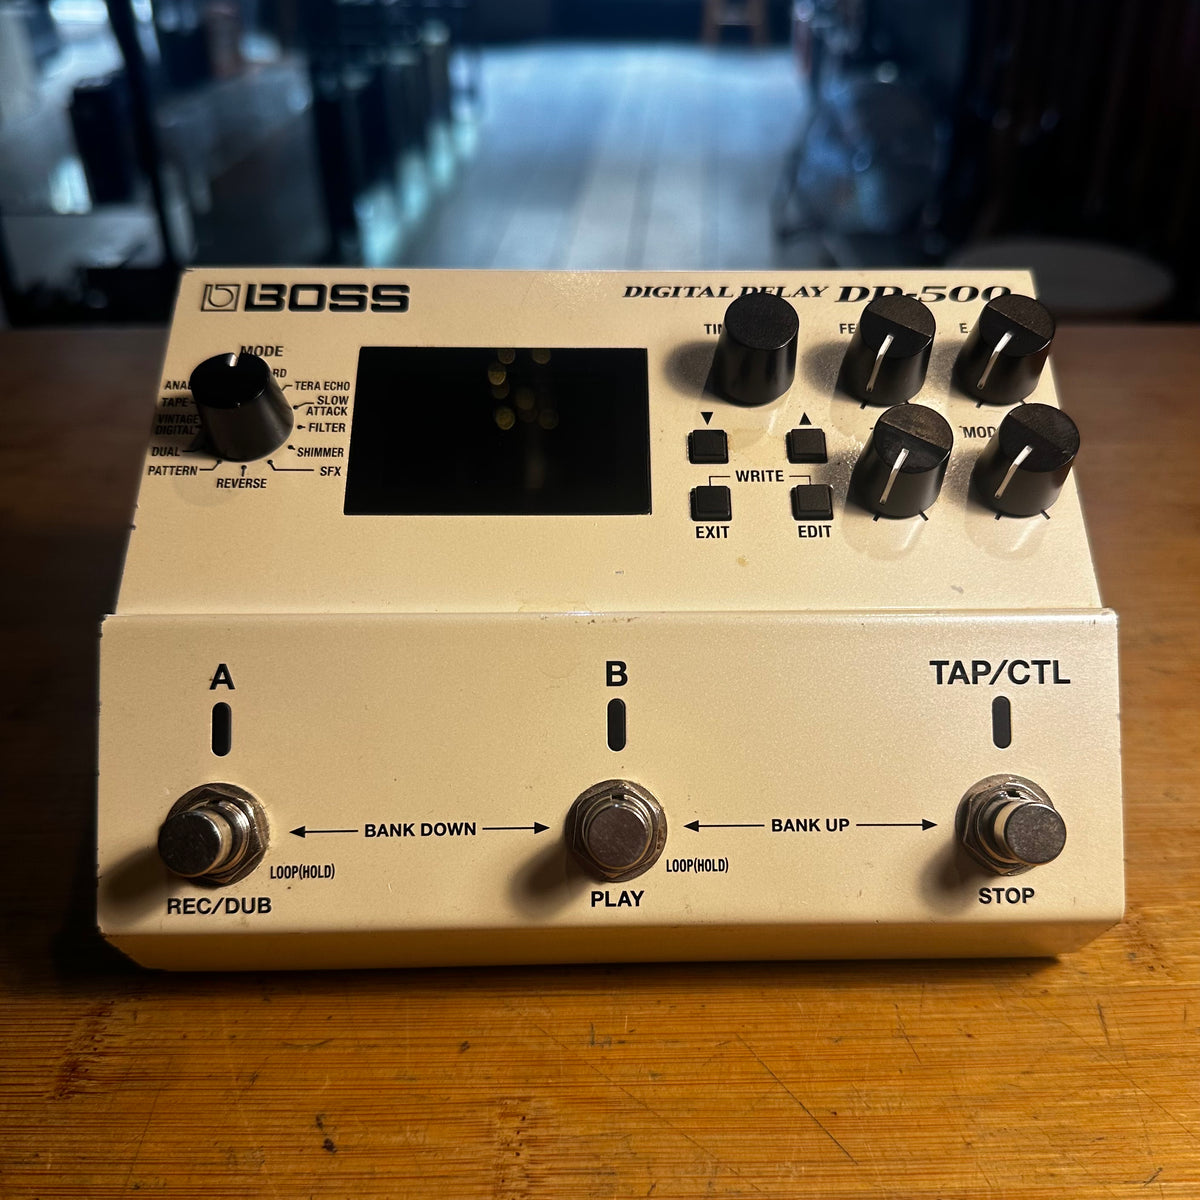 BOSS DD-500 Delay & Looper Multi Effects Pedal - Preowned